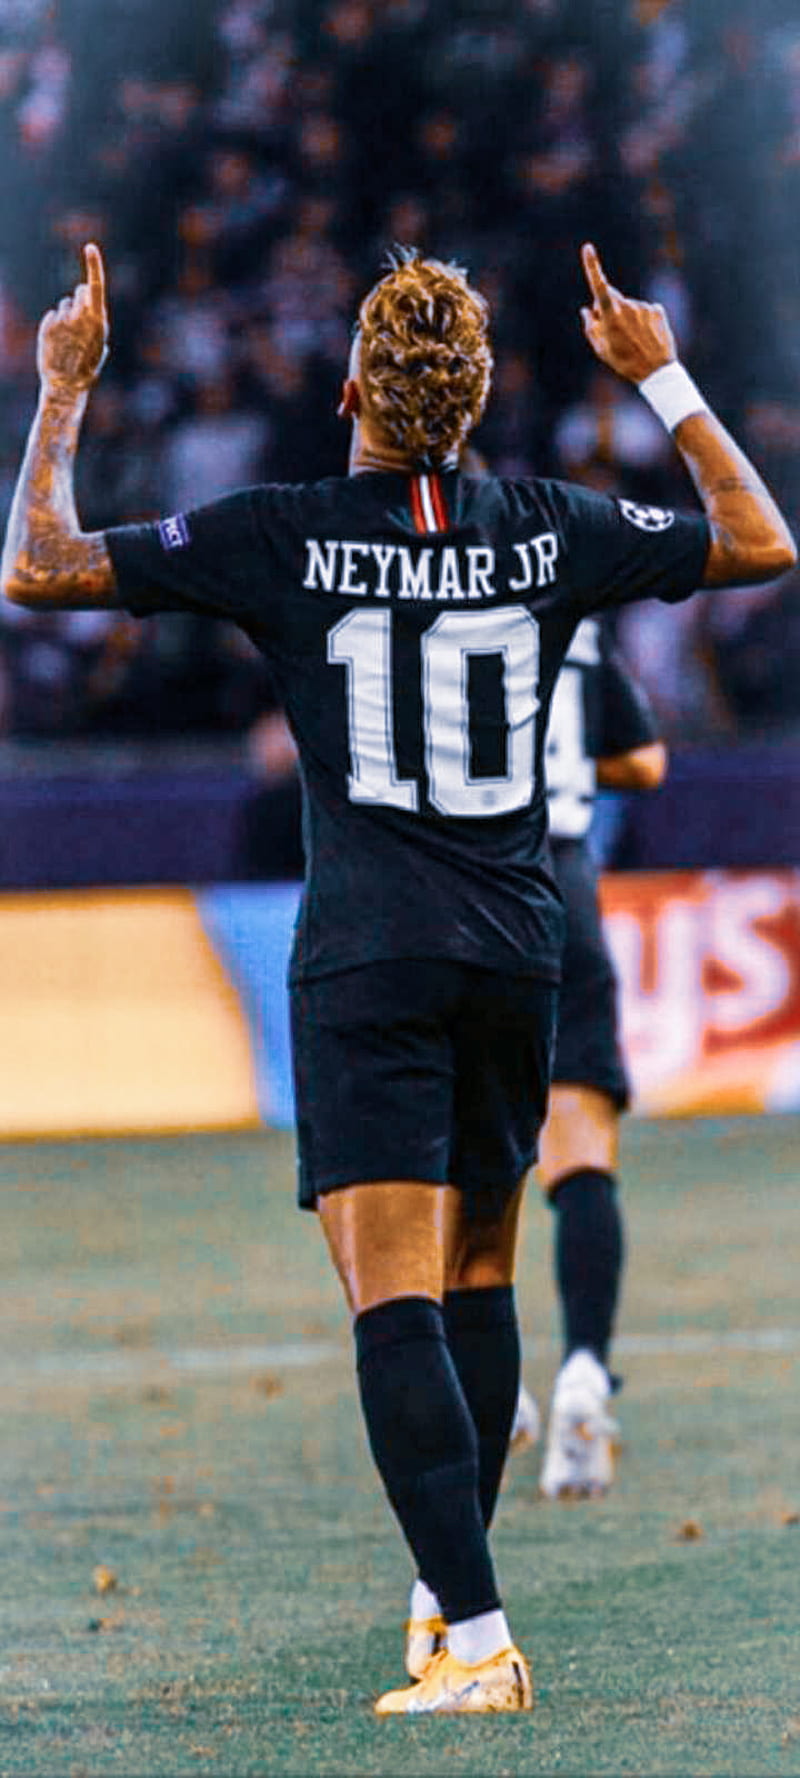 Neymar-Jr Wallpapers HD for Android - APK Download | Neymar jr wallpapers,  Neymar jr, Neymar